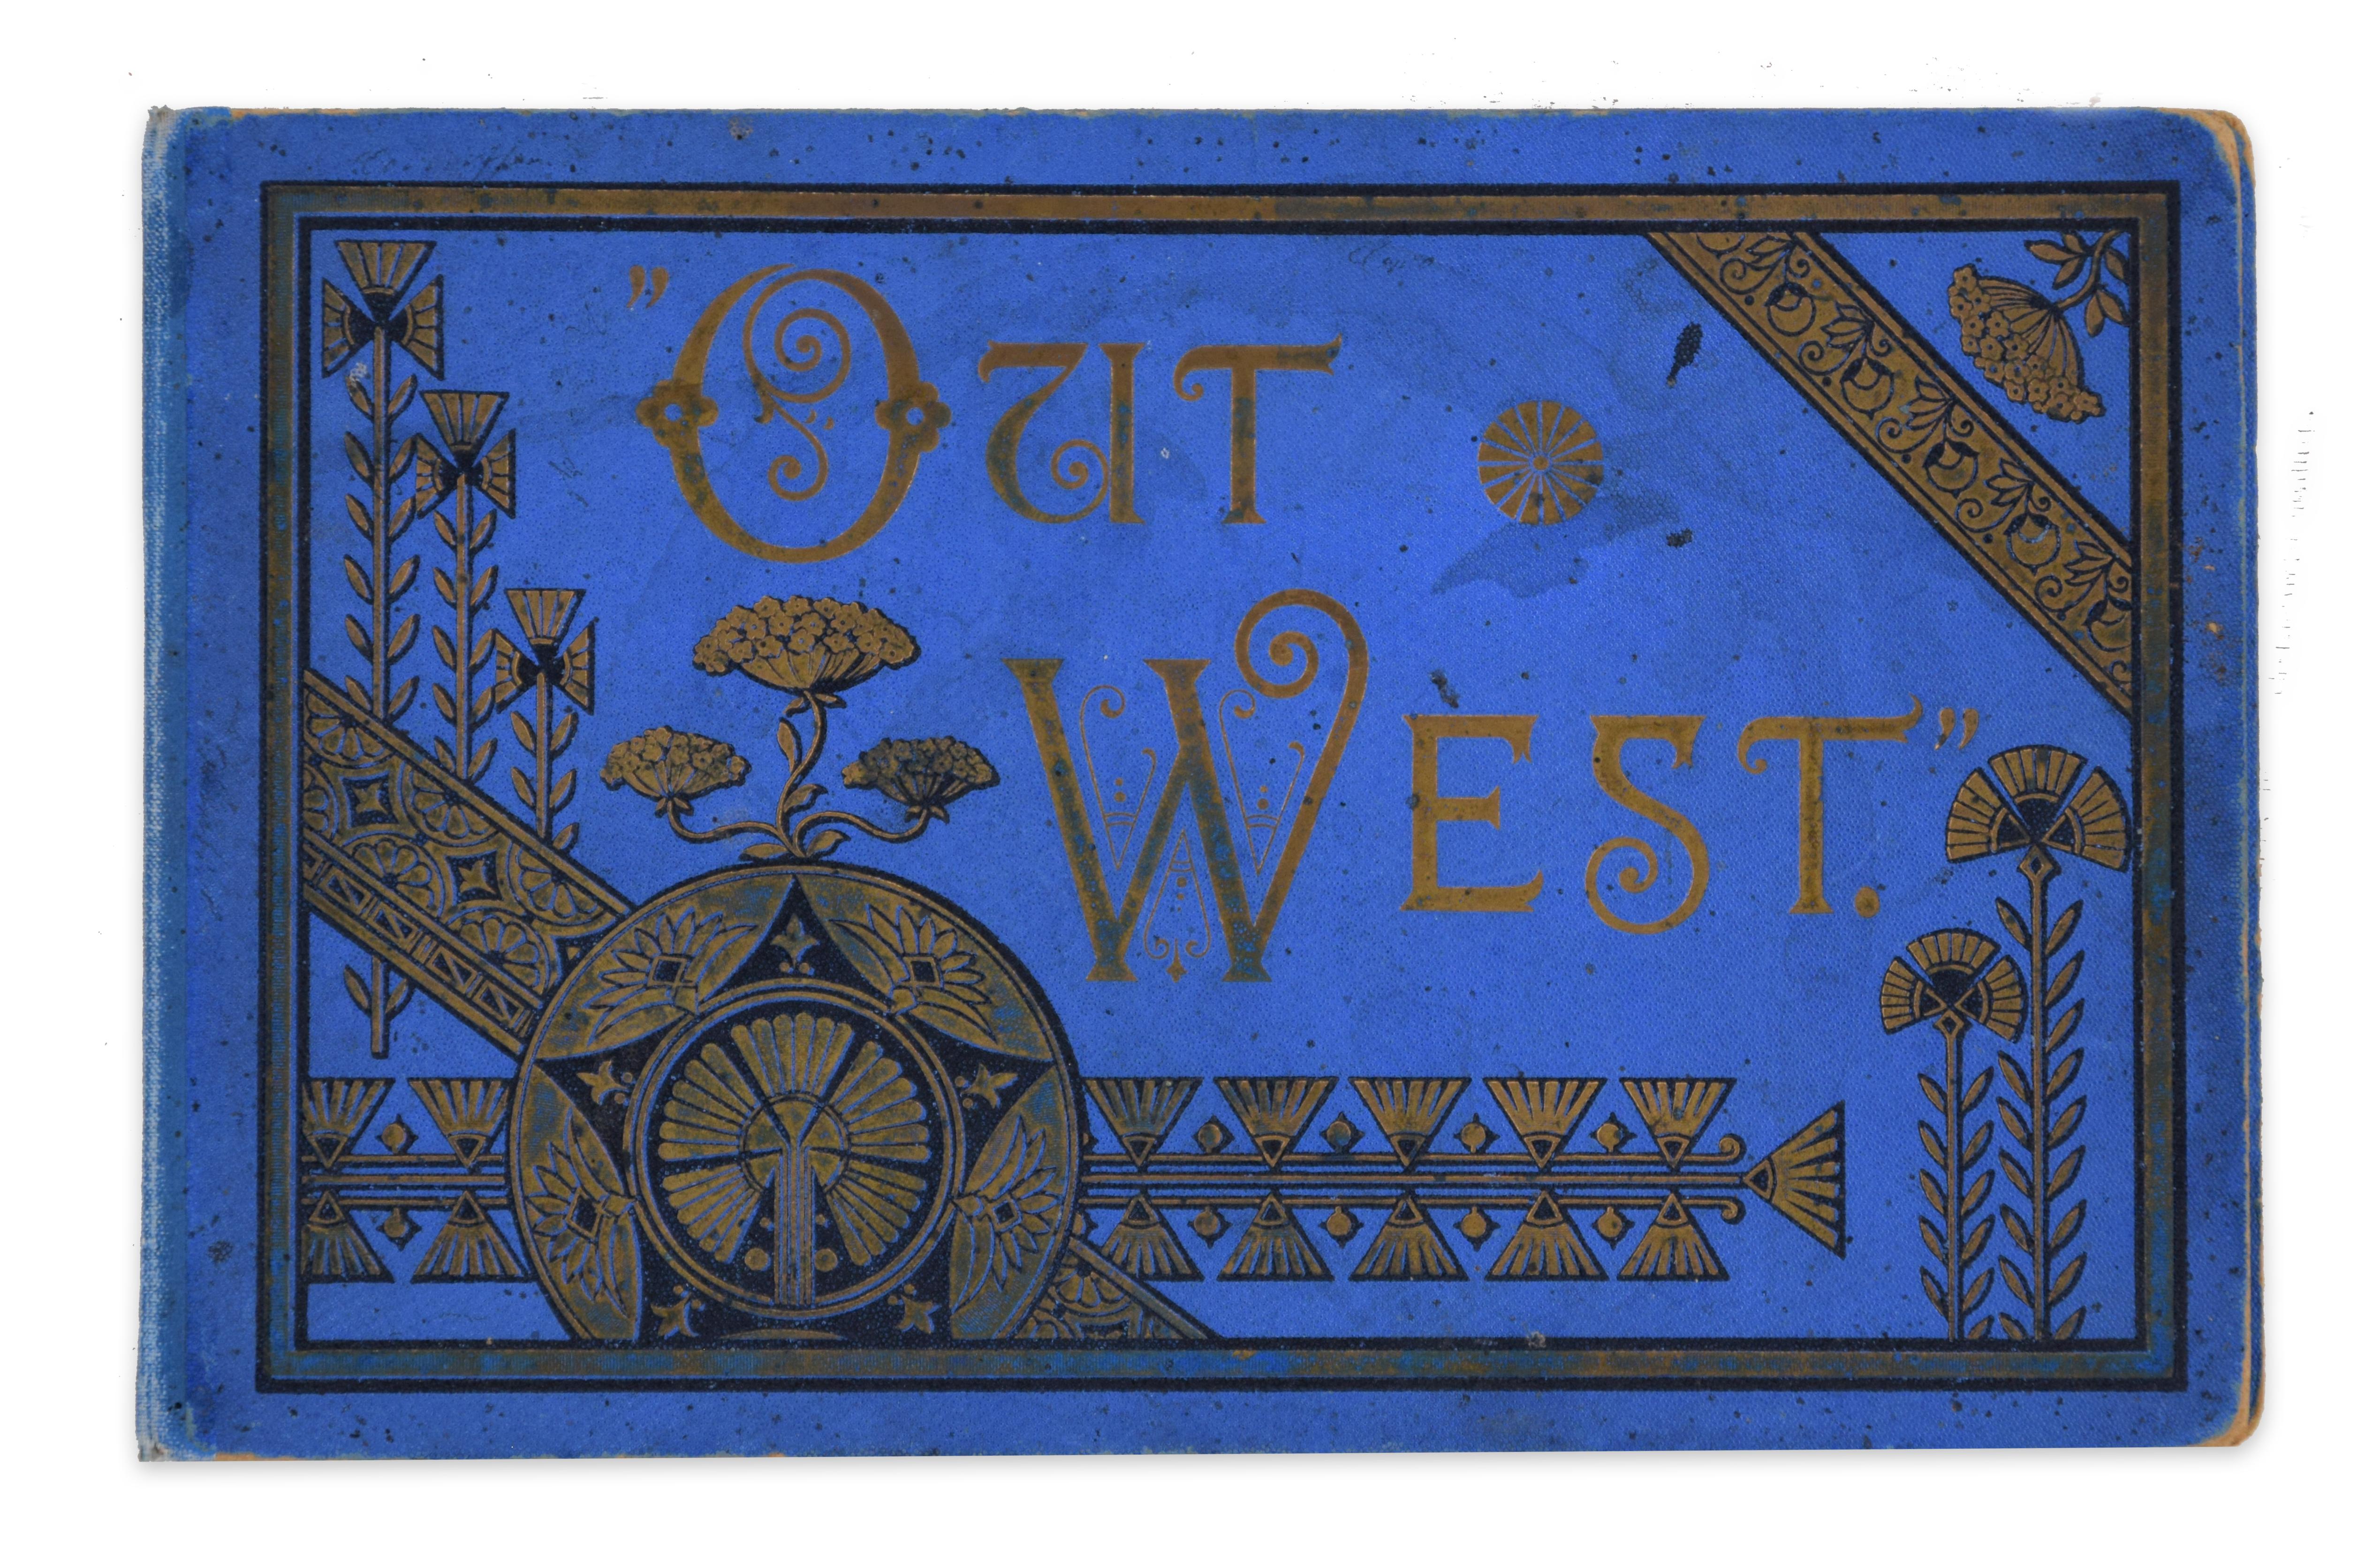 Out West - Vintage Photo Book - Around 1900 - Print by Unknown